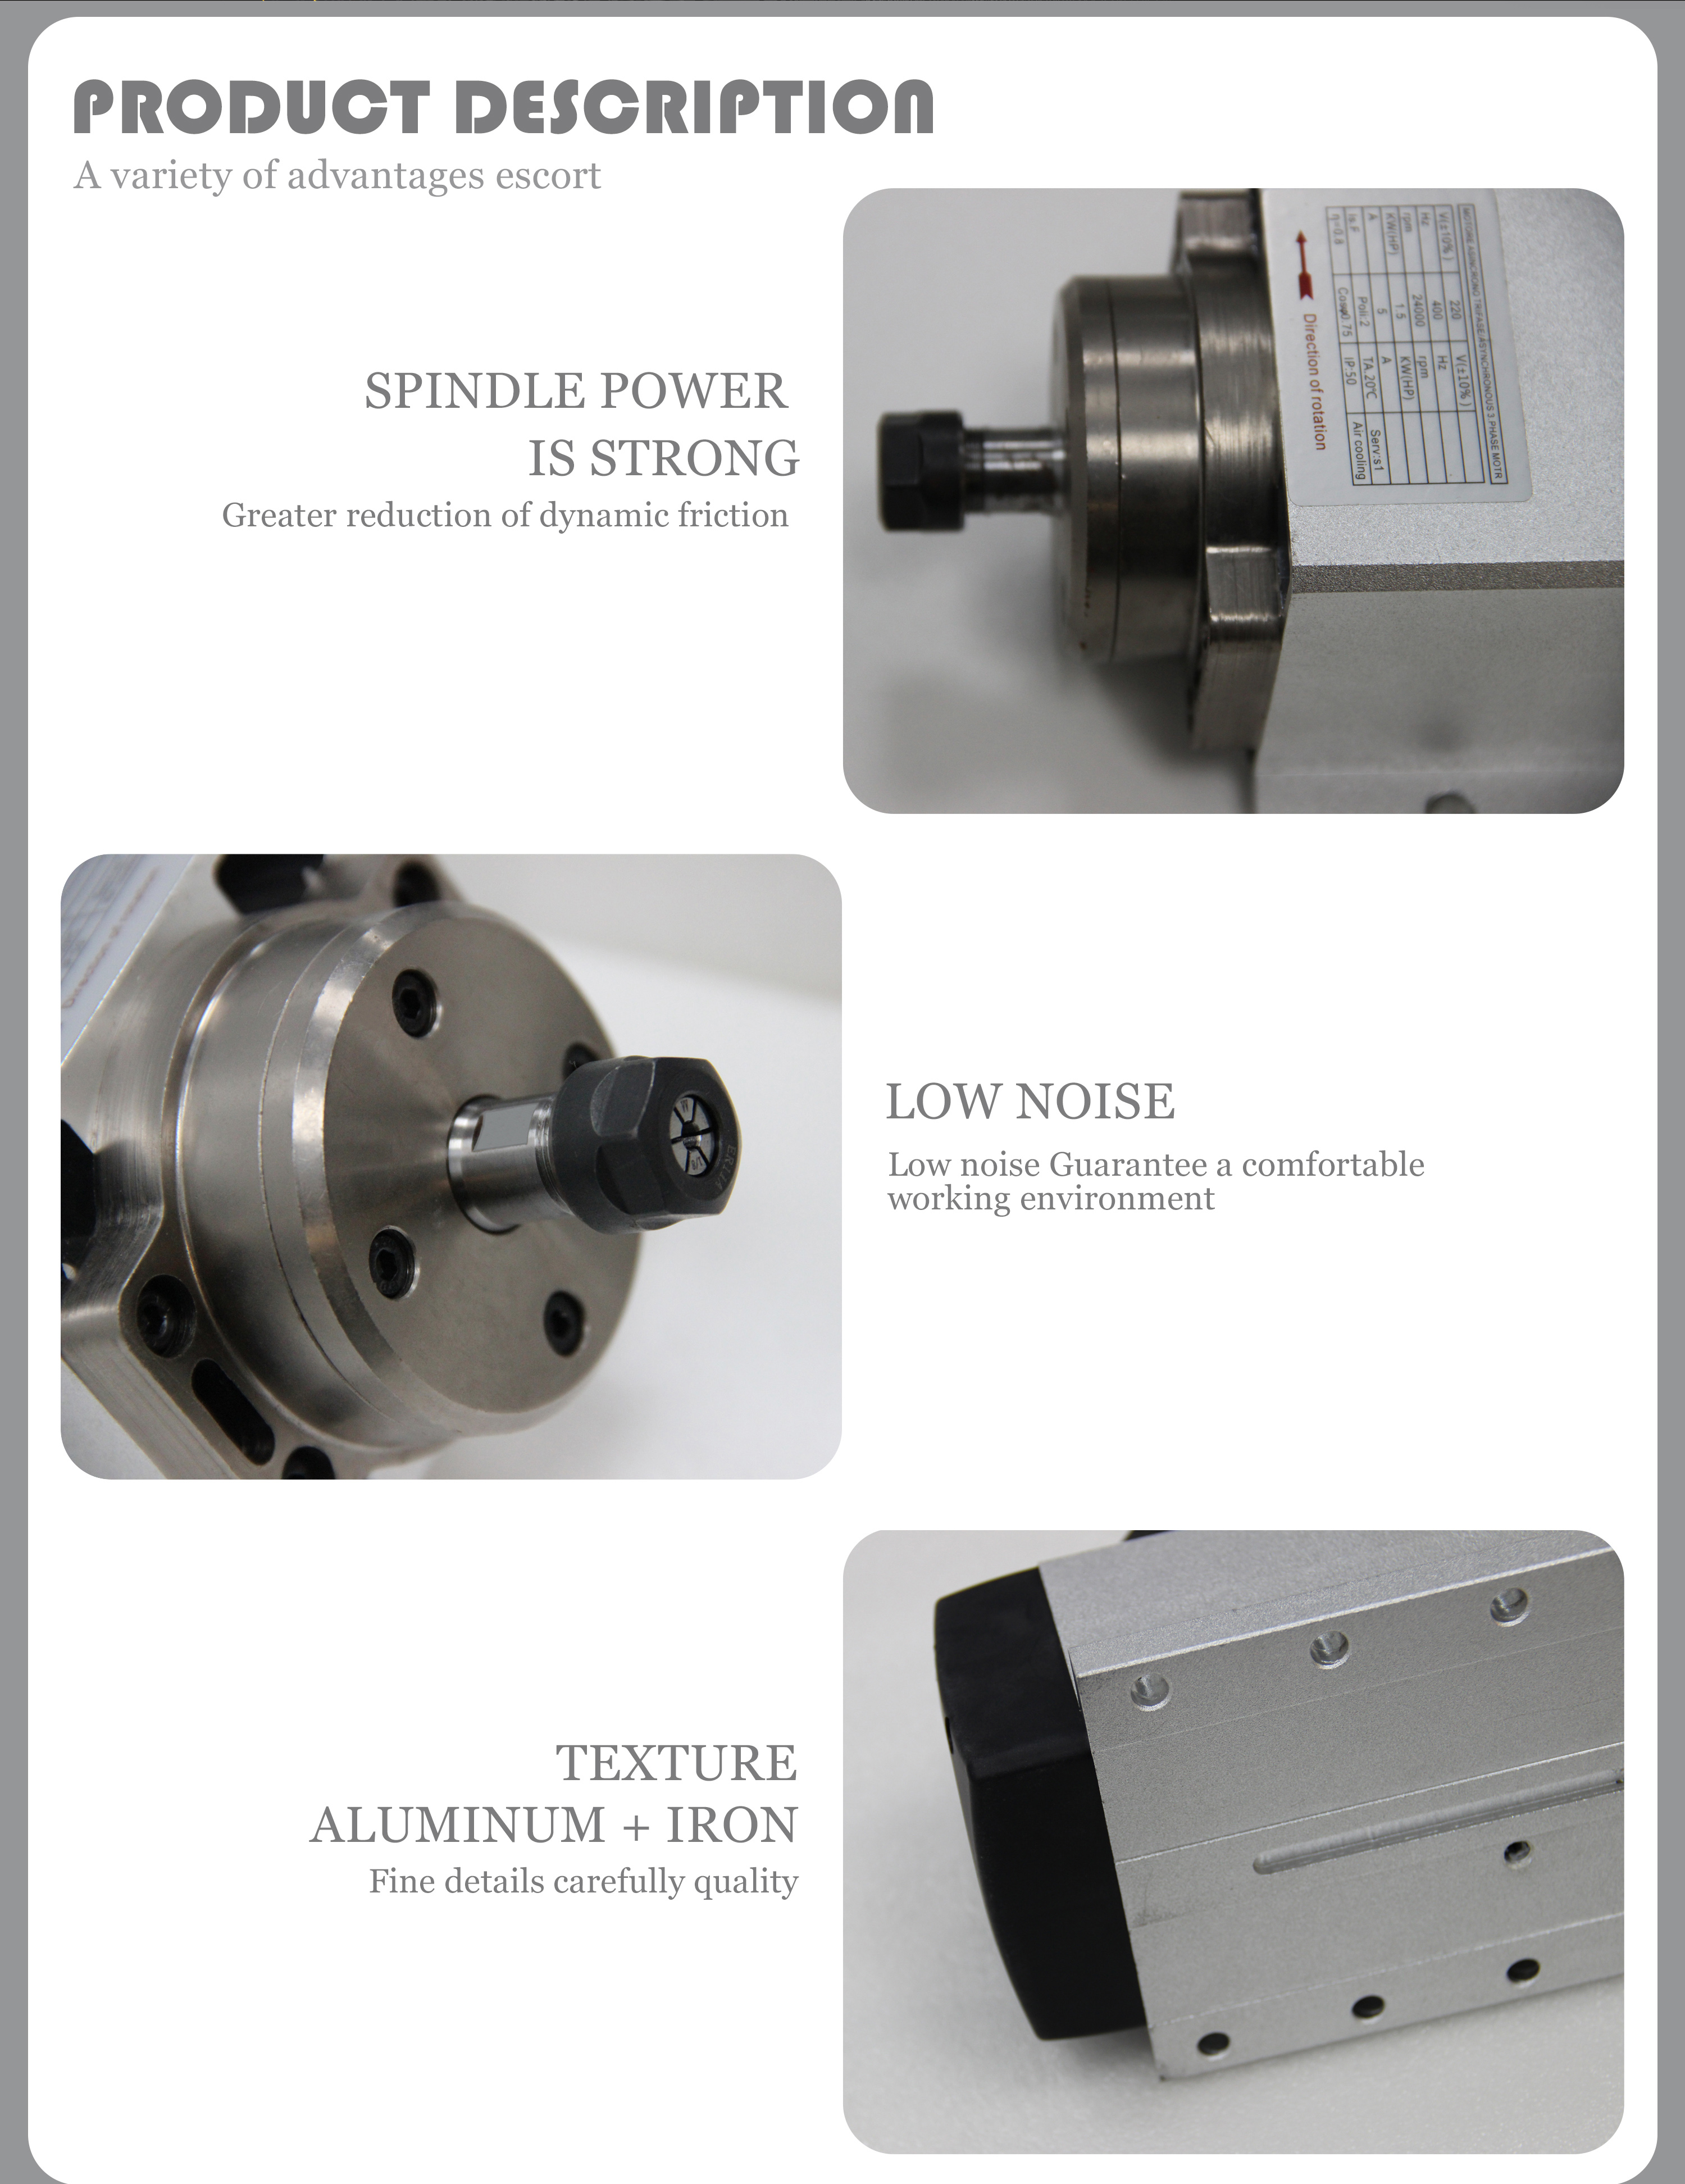 1500w spindle motor